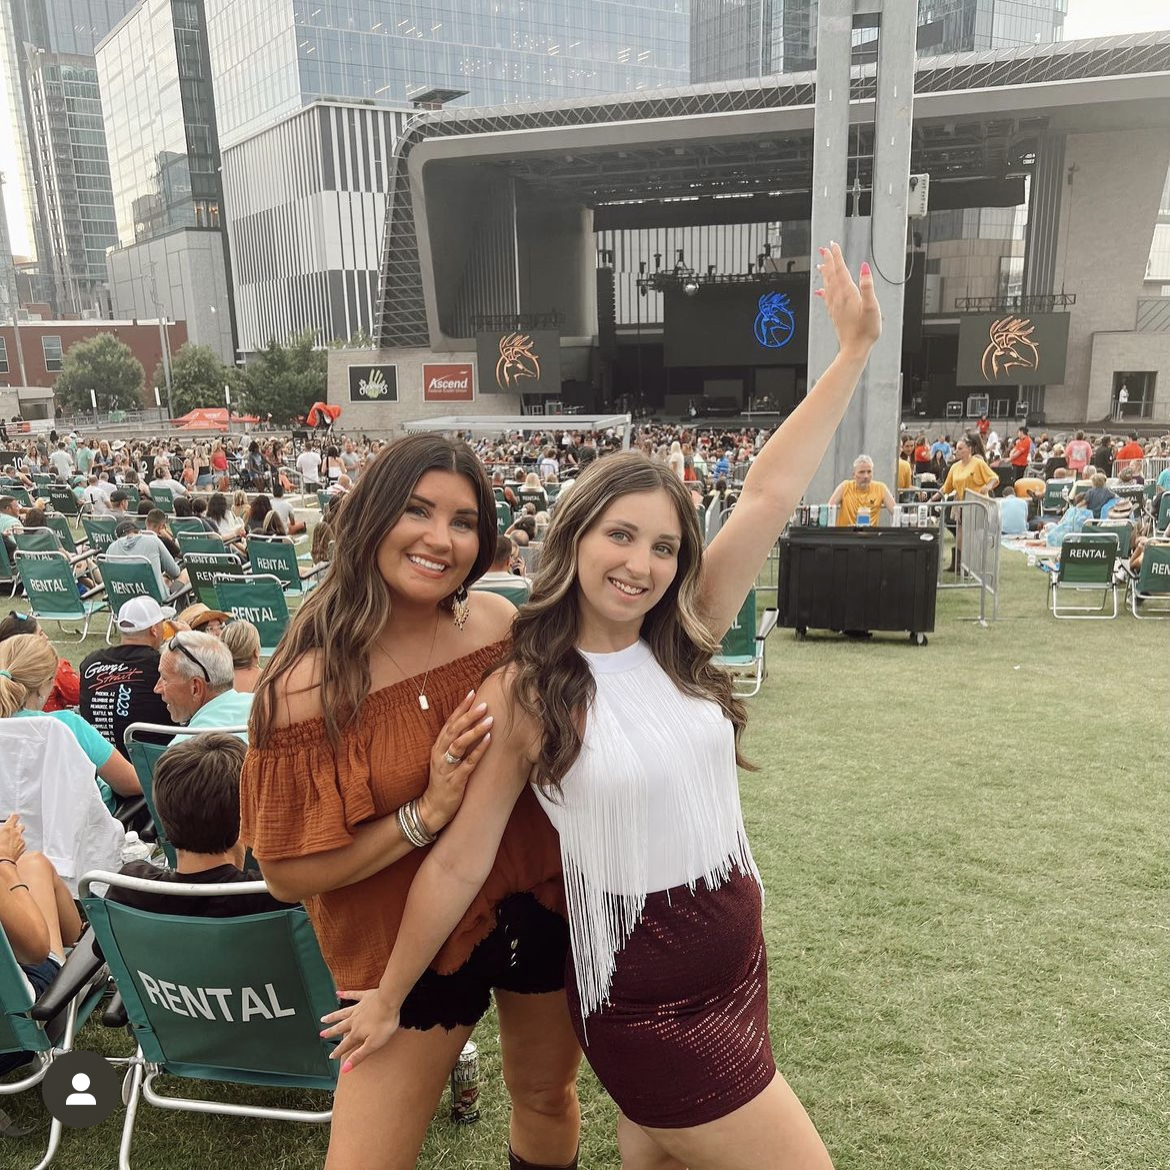 Tag a friend that will help you bring the good vibes back to Ascend Amphitheater this season 👯‍♀️✨⬇️ 📸: @alyssa.potts7 (on IG)